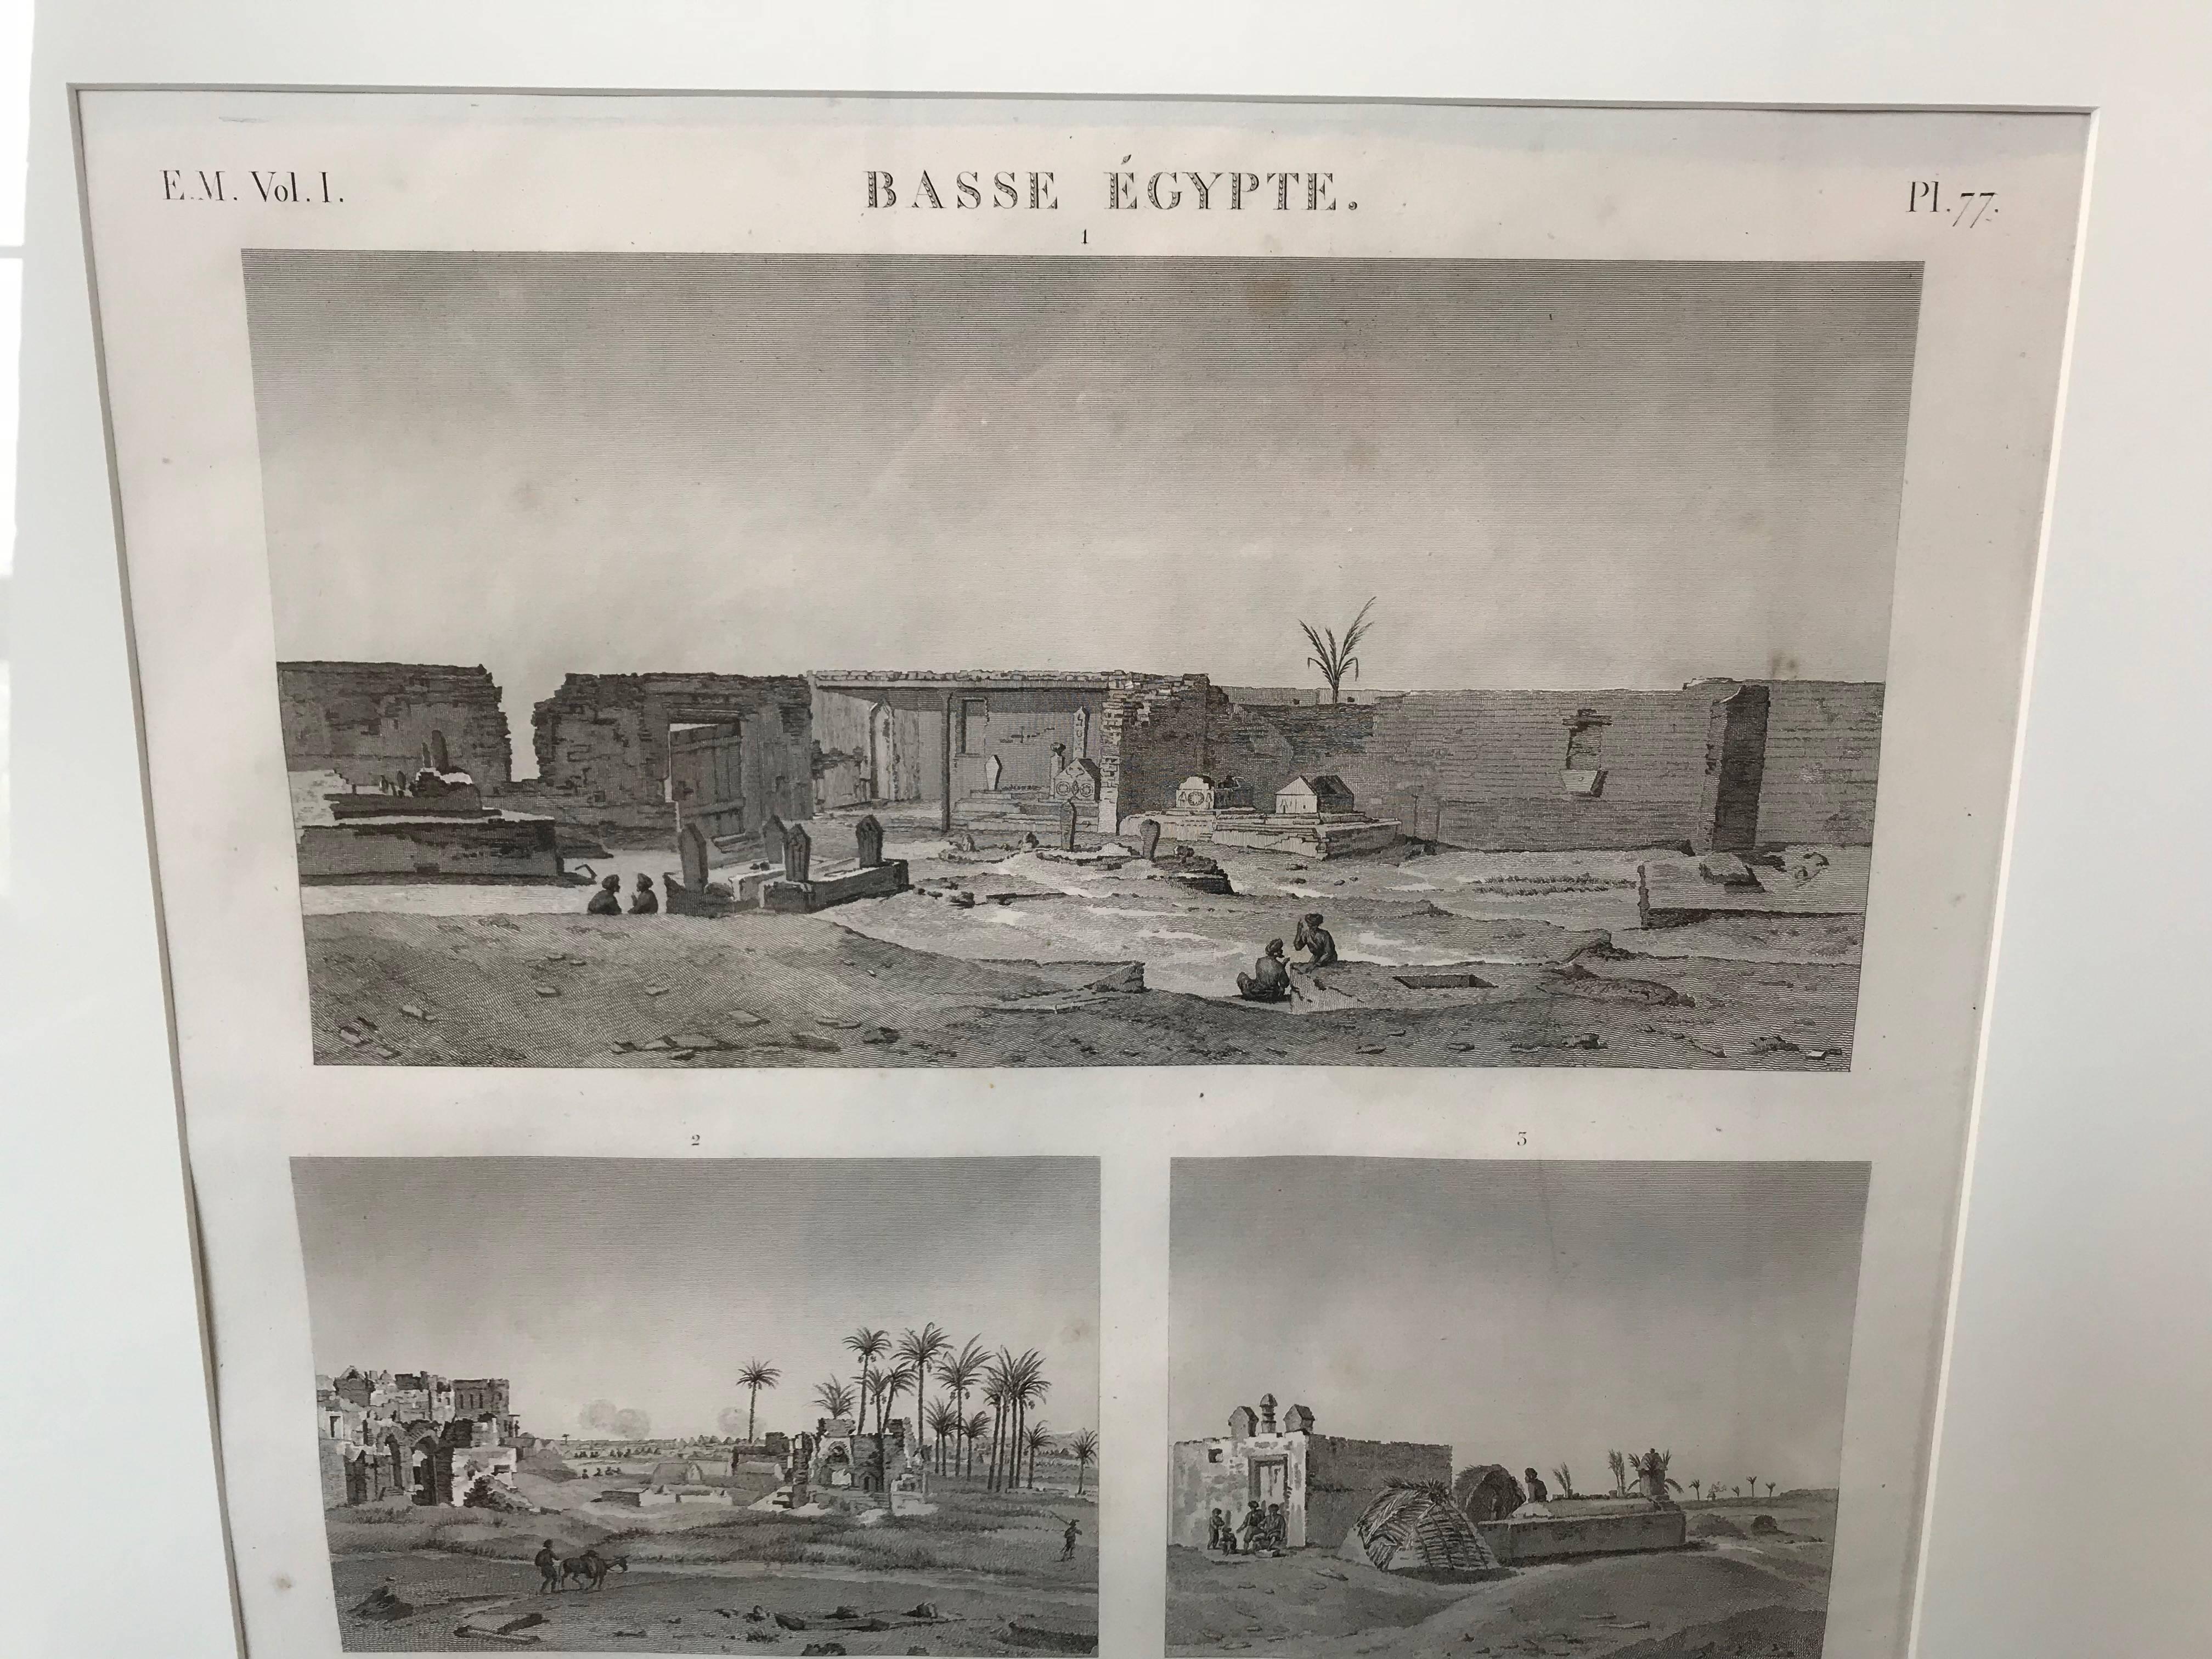 Engraving tracks Napoleon's famous campaign in Egypt in 1798-1799. Published by Pancoucke in Paris and appeared from 1820 to 1830. 

Basse, Egypt: Vues des Tombeau de Damiette; Vue d'un Village Ruine, Environne de Tombeaux.

Custom framed.